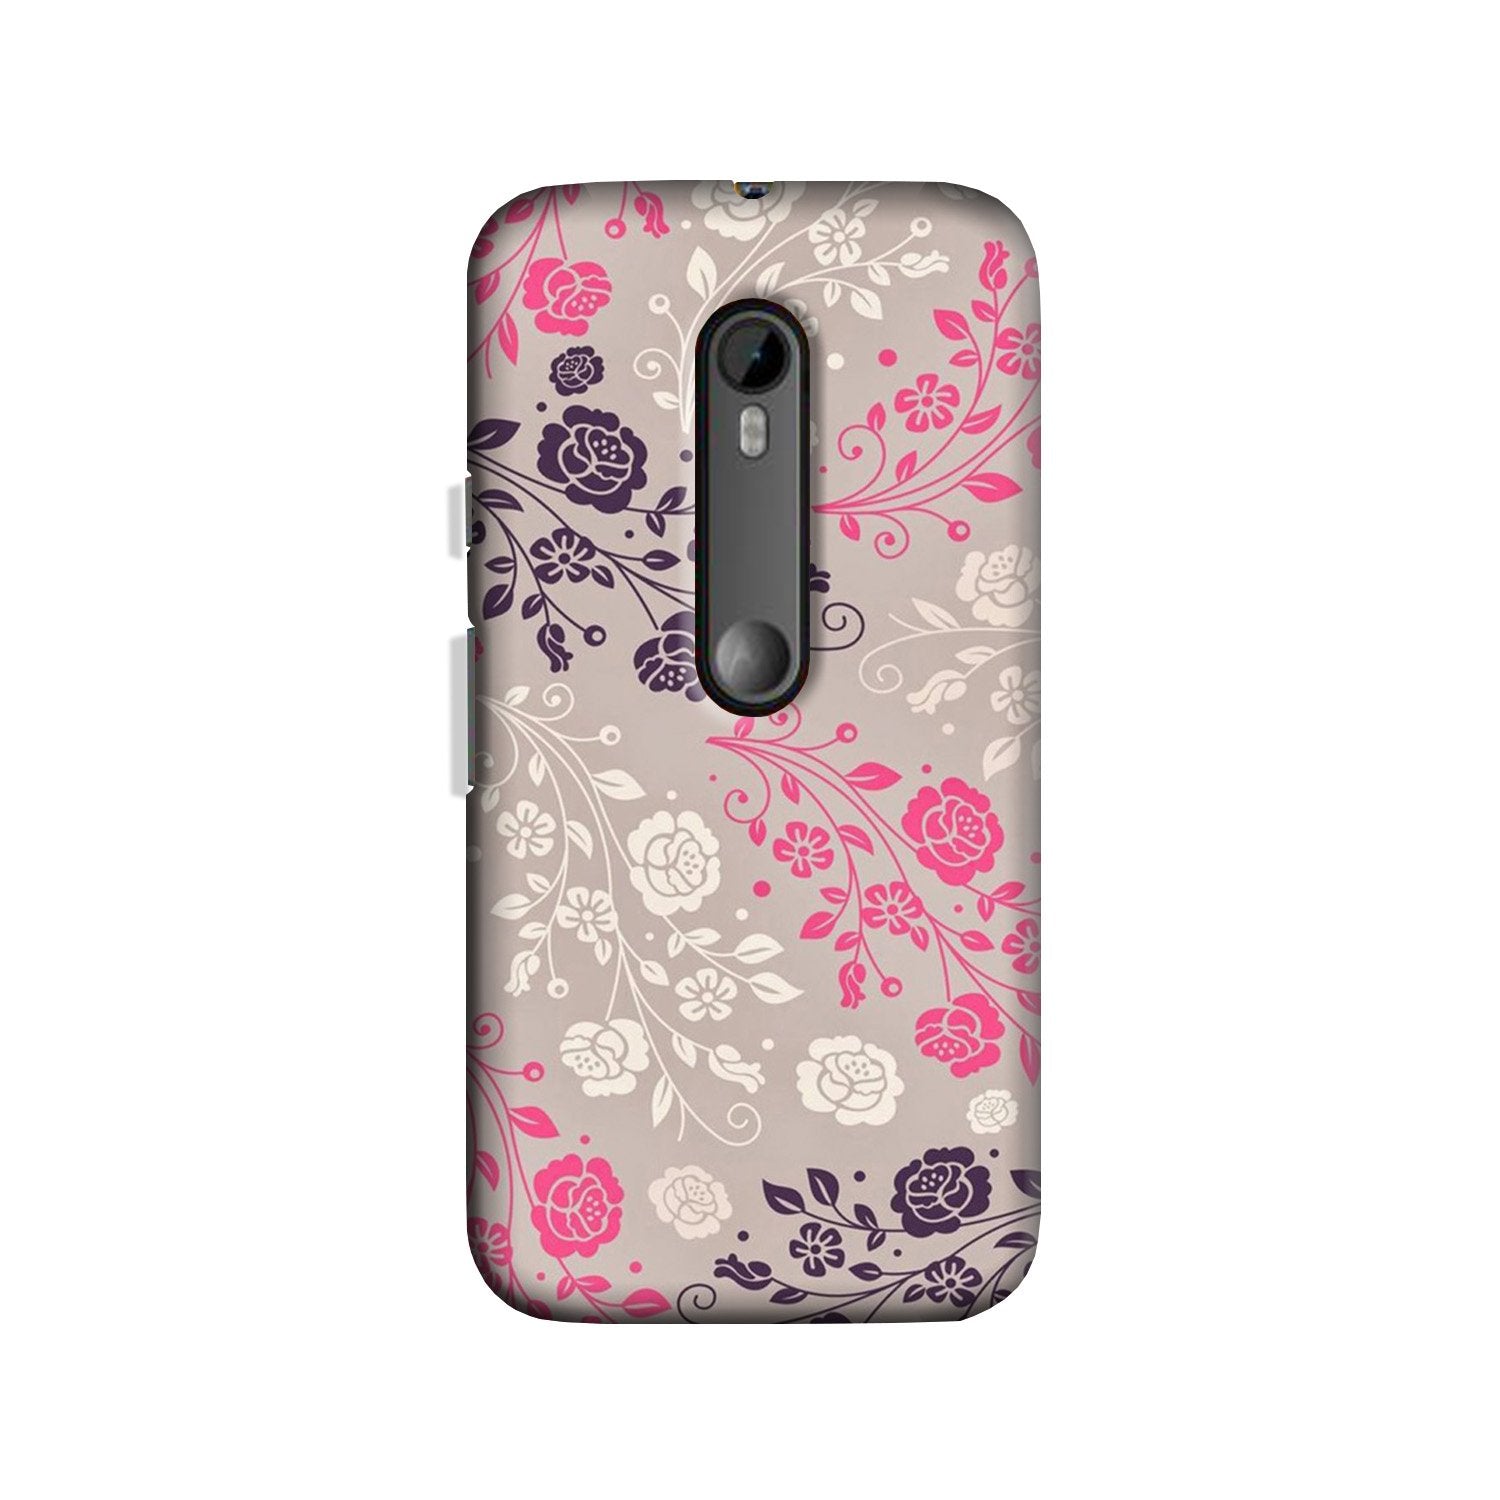 Pattern2 Case for Moto X Style